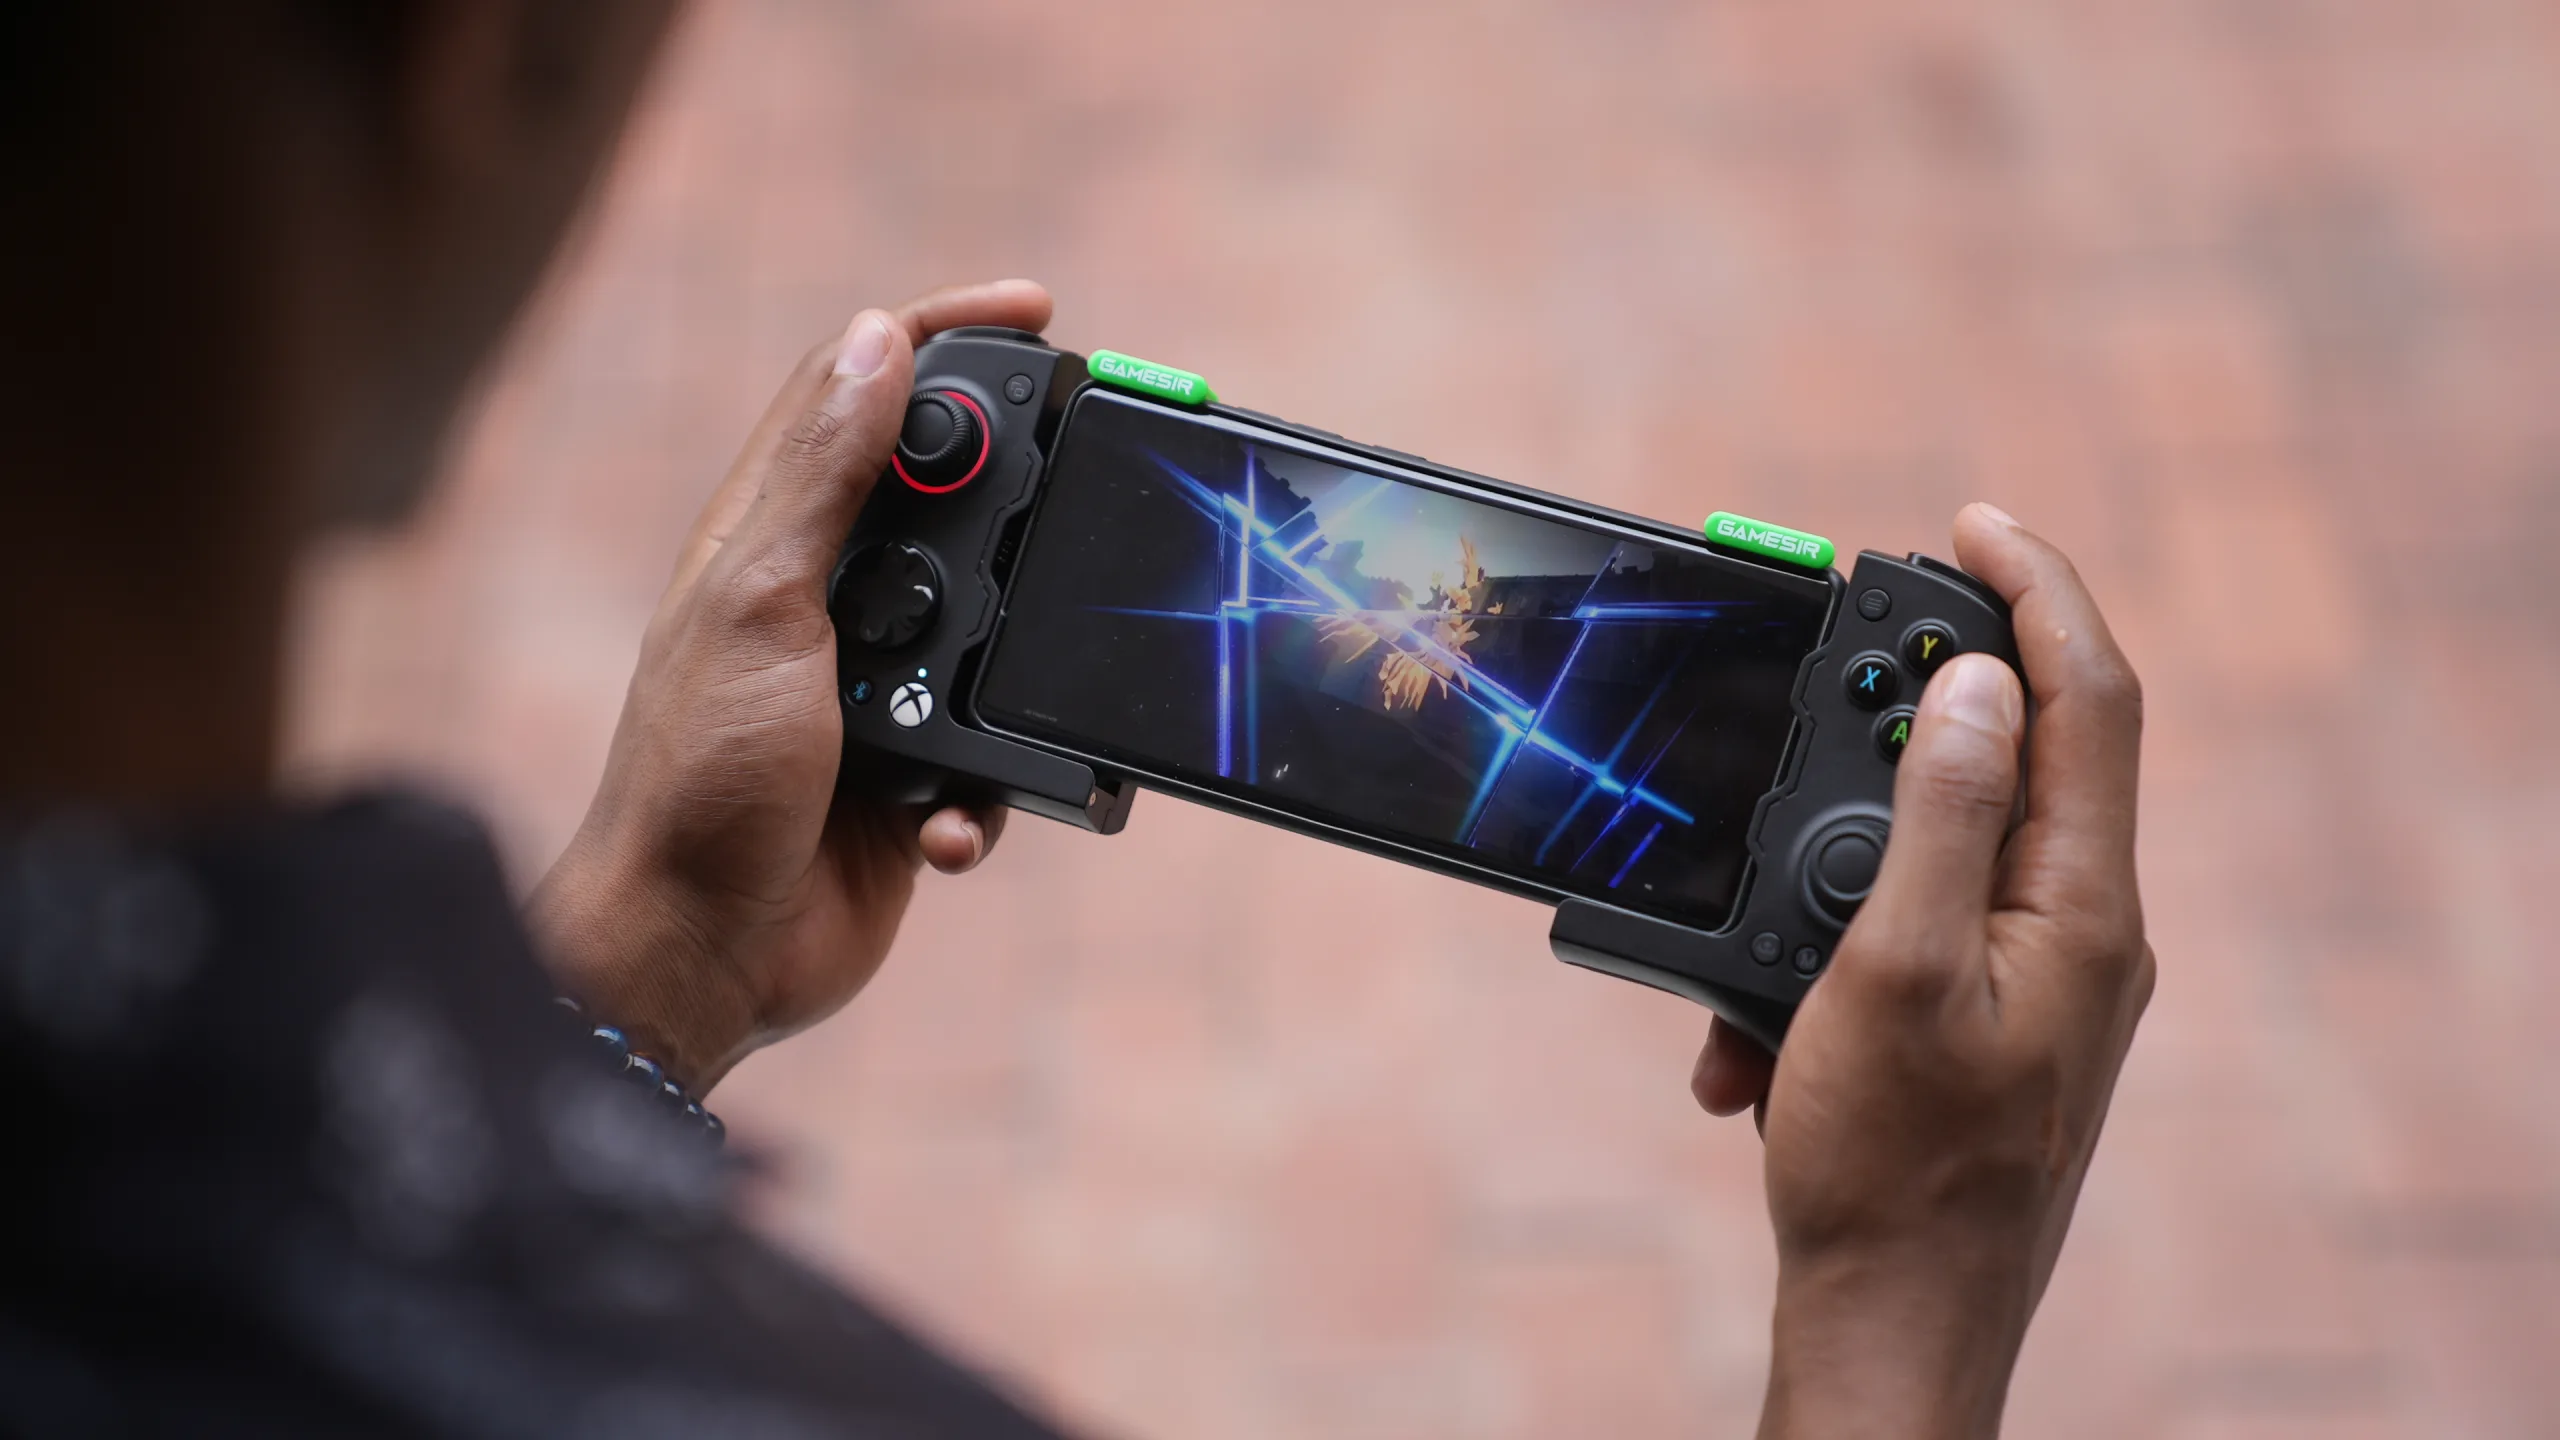 GameSir's new Bluetooth Android controller has Hall Effect sticks